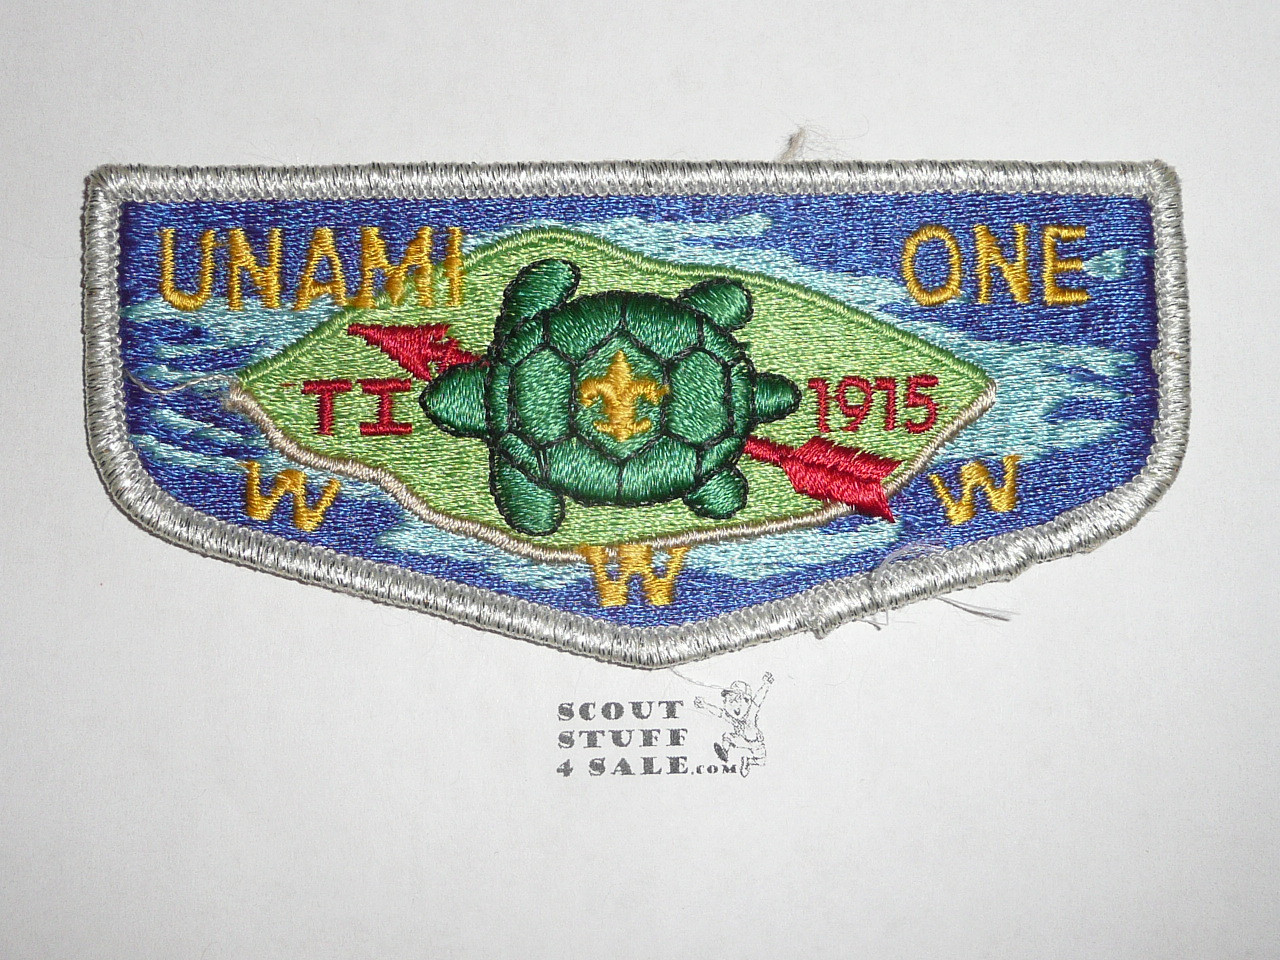 Order of the Arrow Lodge #1 Unami s7 Flap Patch